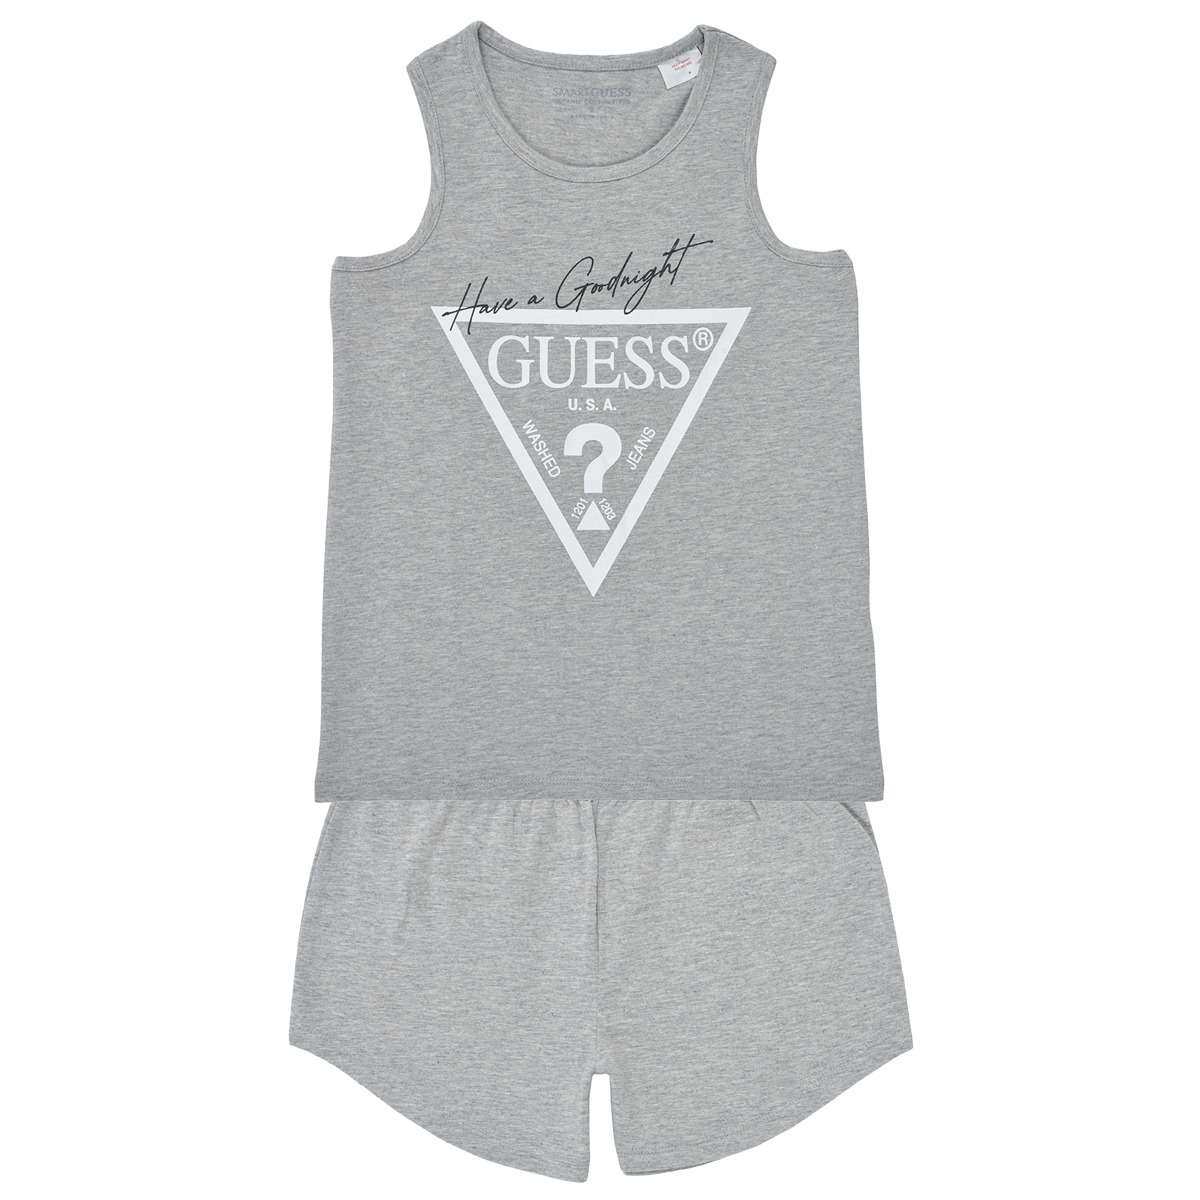 Clothing Girl Sleepsuits Guess GAMEE Grey